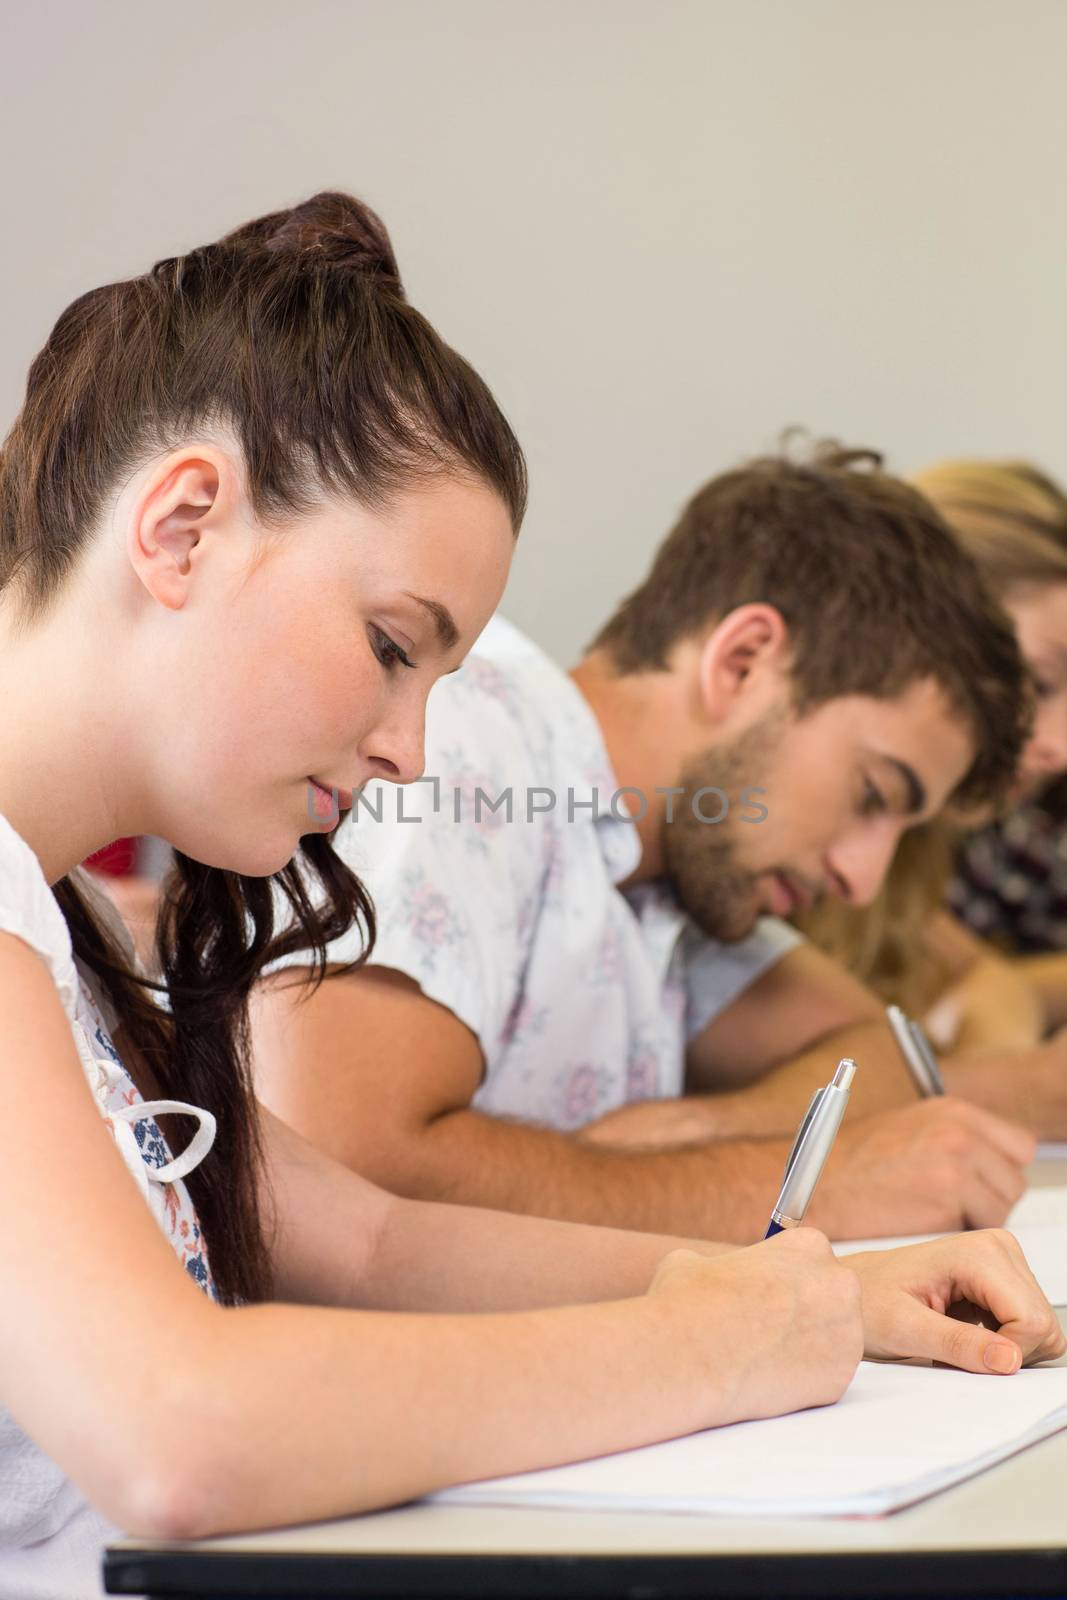 Students writing notes in classroom by Wavebreakmedia